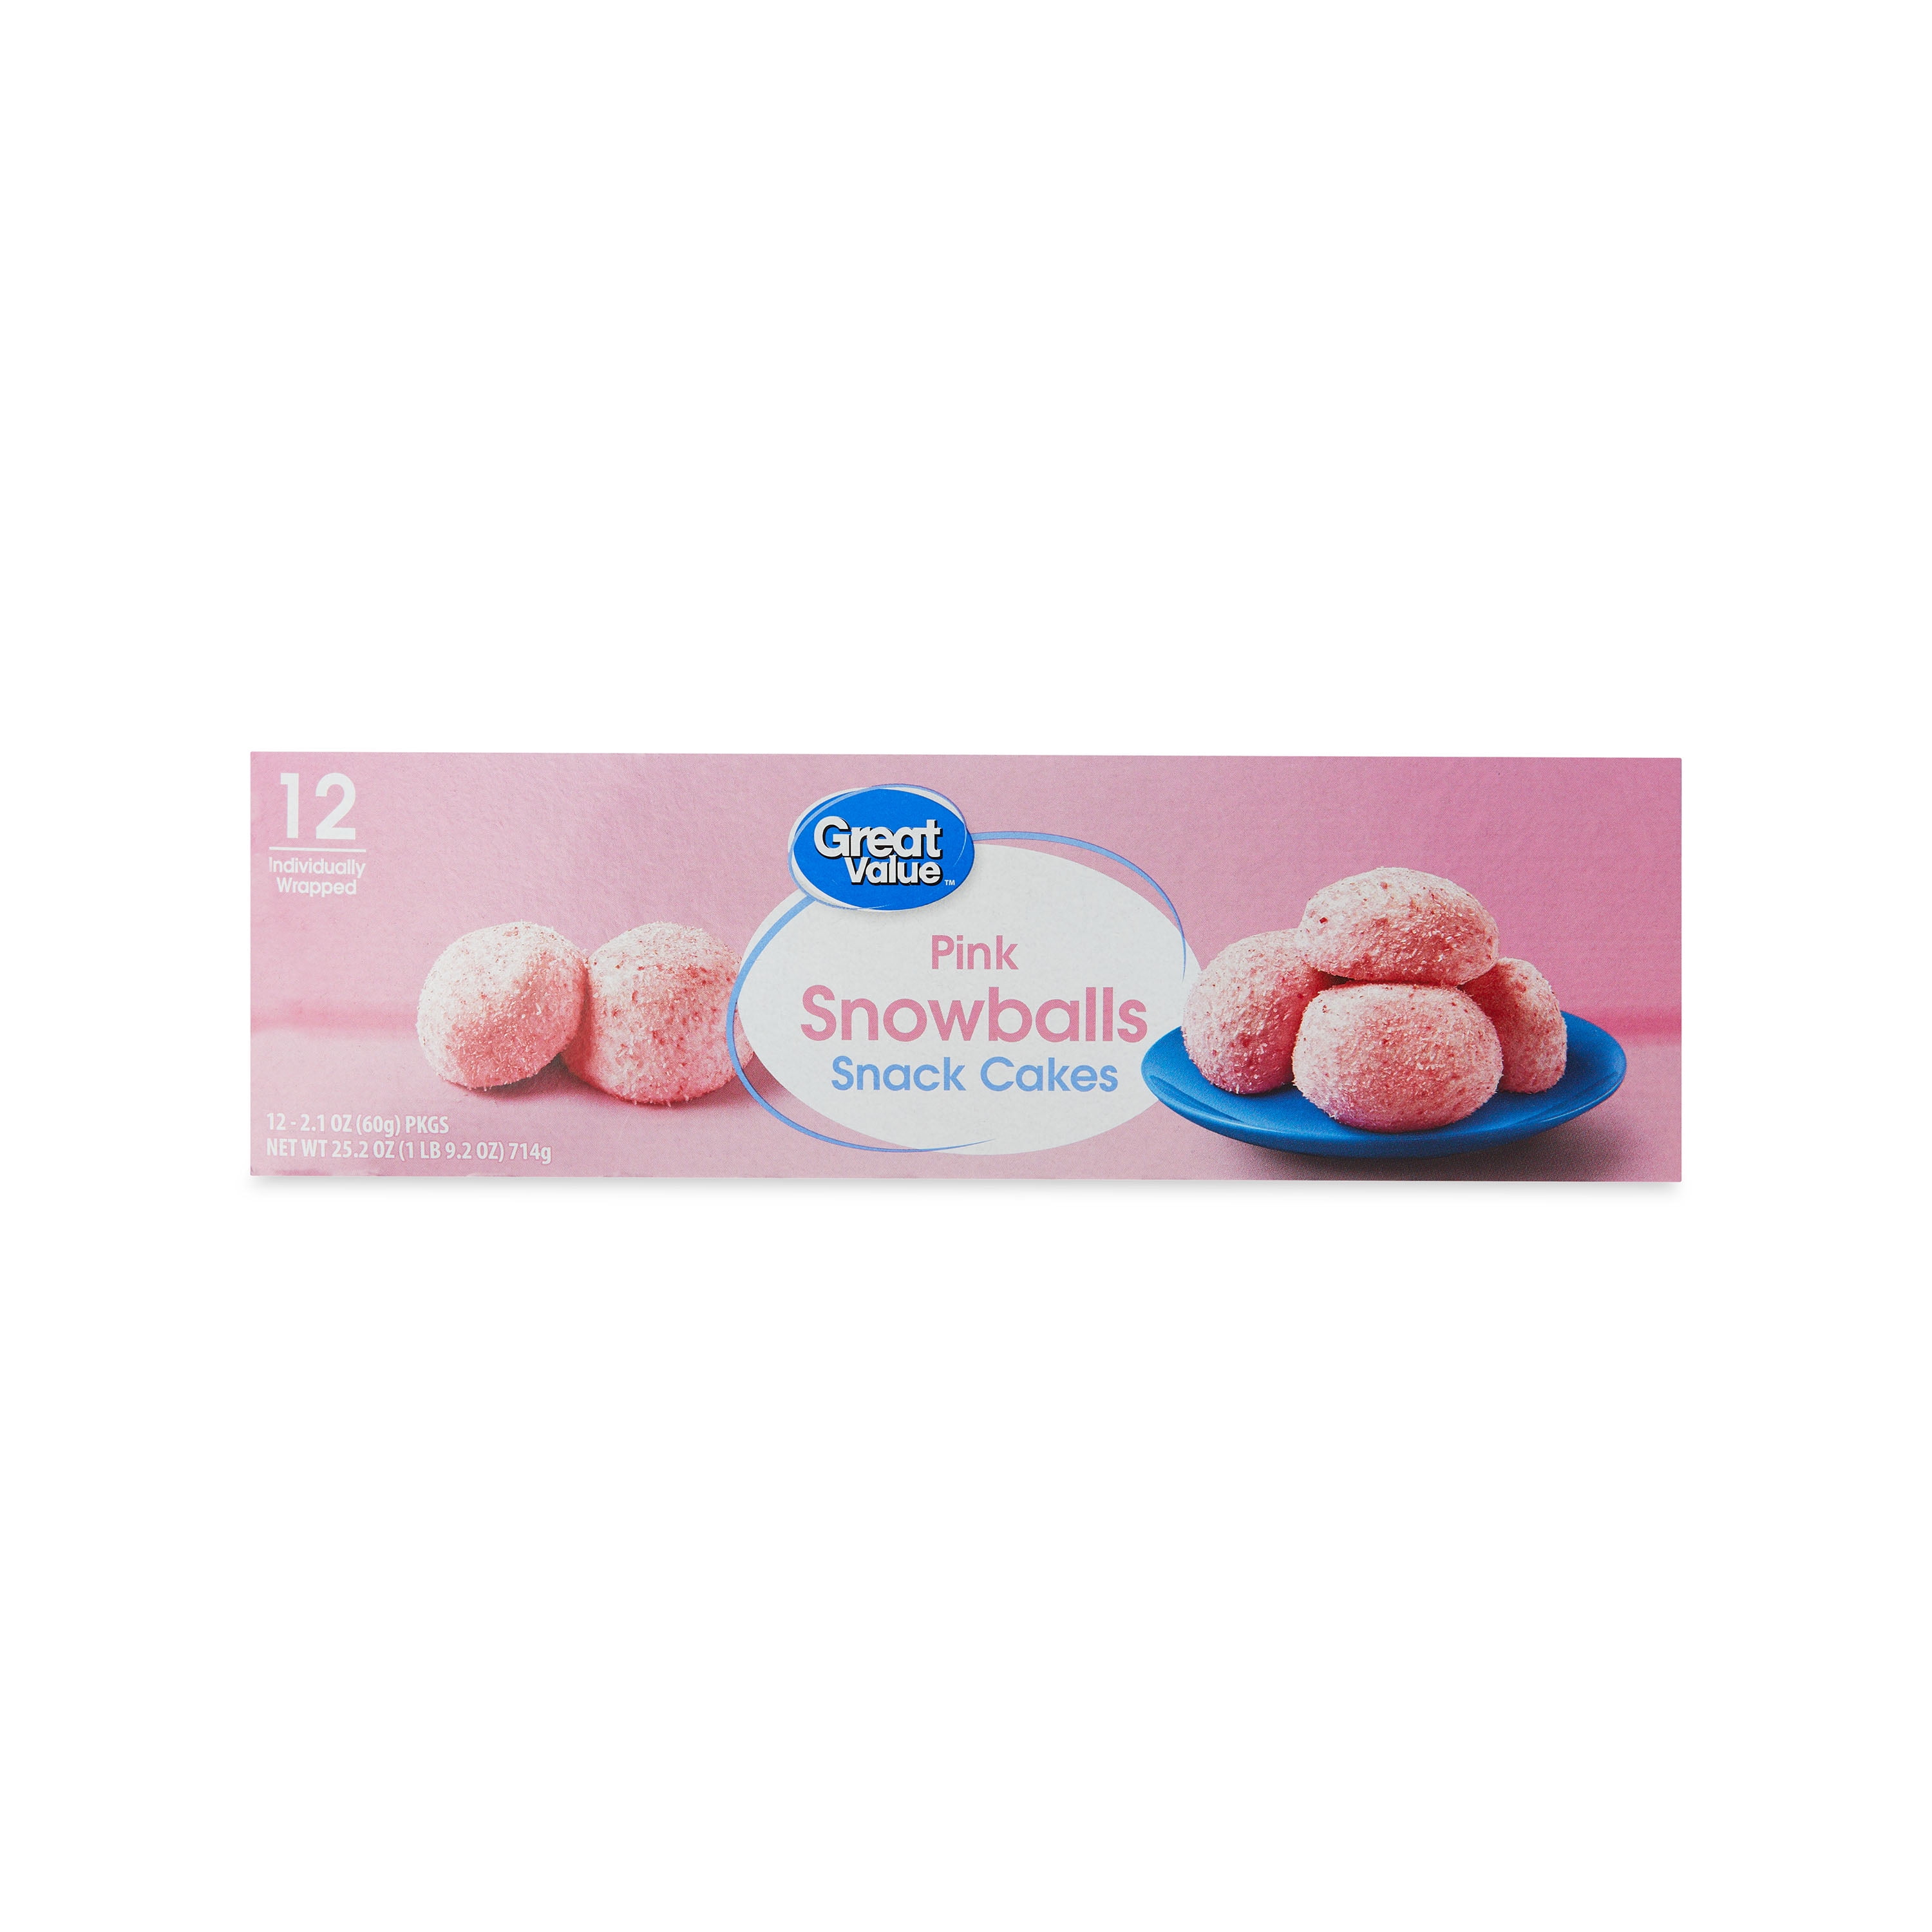 Great Value Pink Snowballs Snack Cakes, 25.2 oz, 12 Count